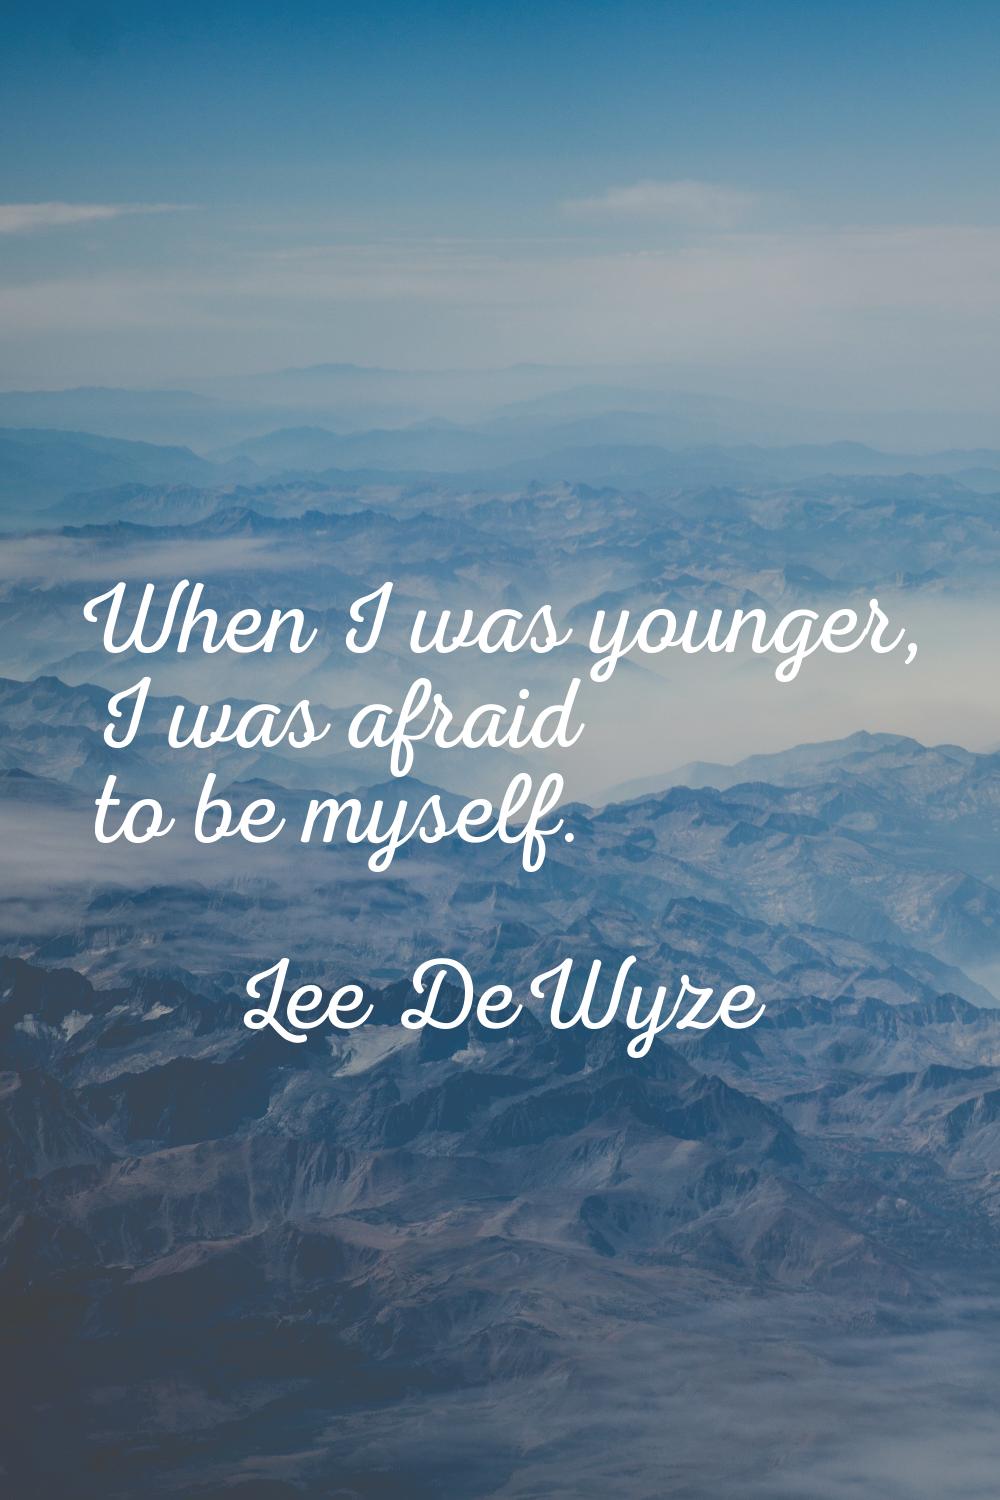 When I was younger, I was afraid to be myself.